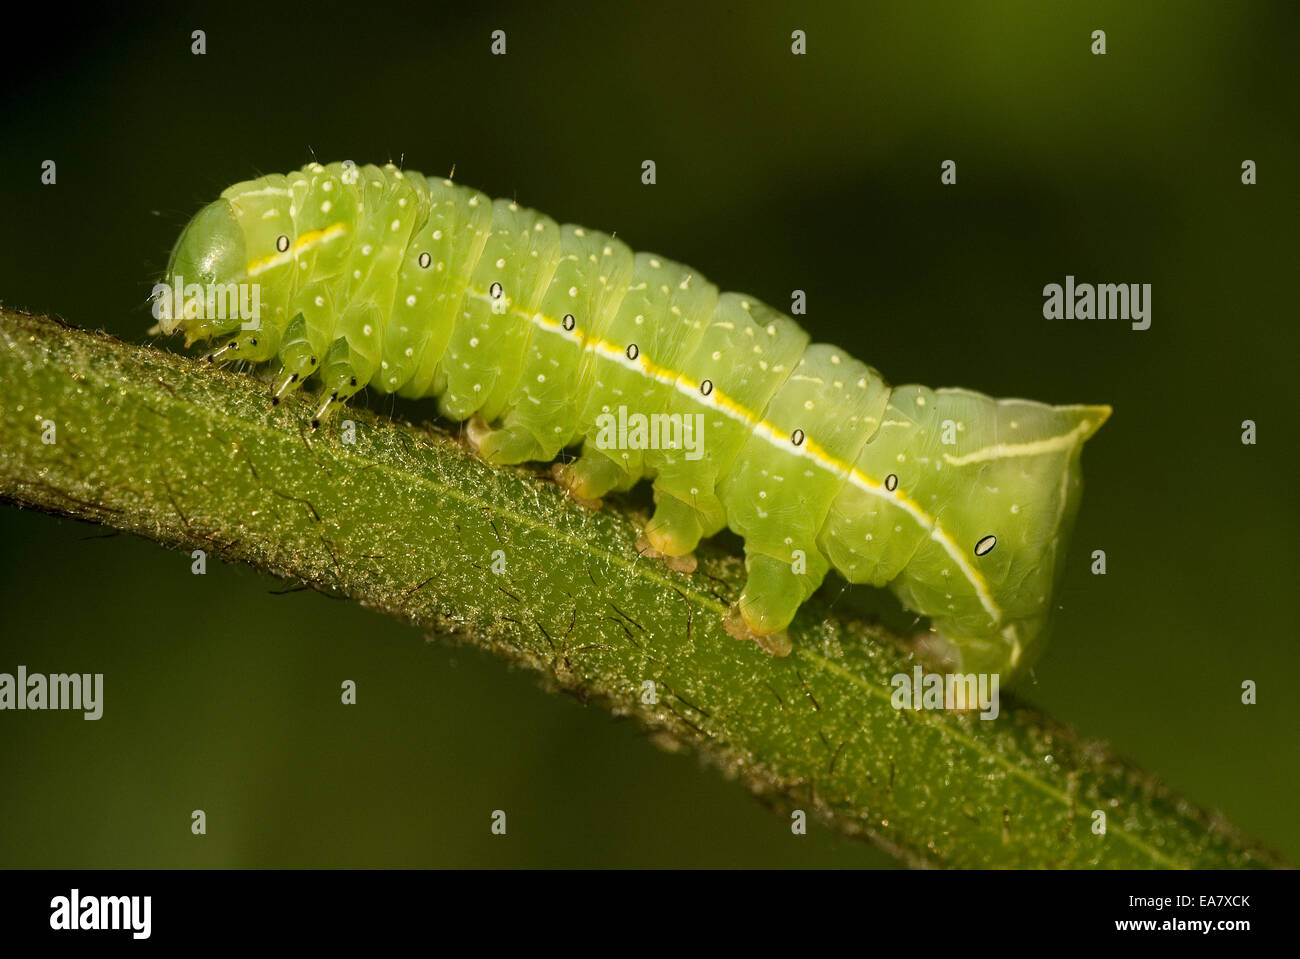 Copper Underwing, Humped Green Fruitworm, or Pyramidal Green Fruitworm larva (Amphipyra pyramidea) Stock Photo